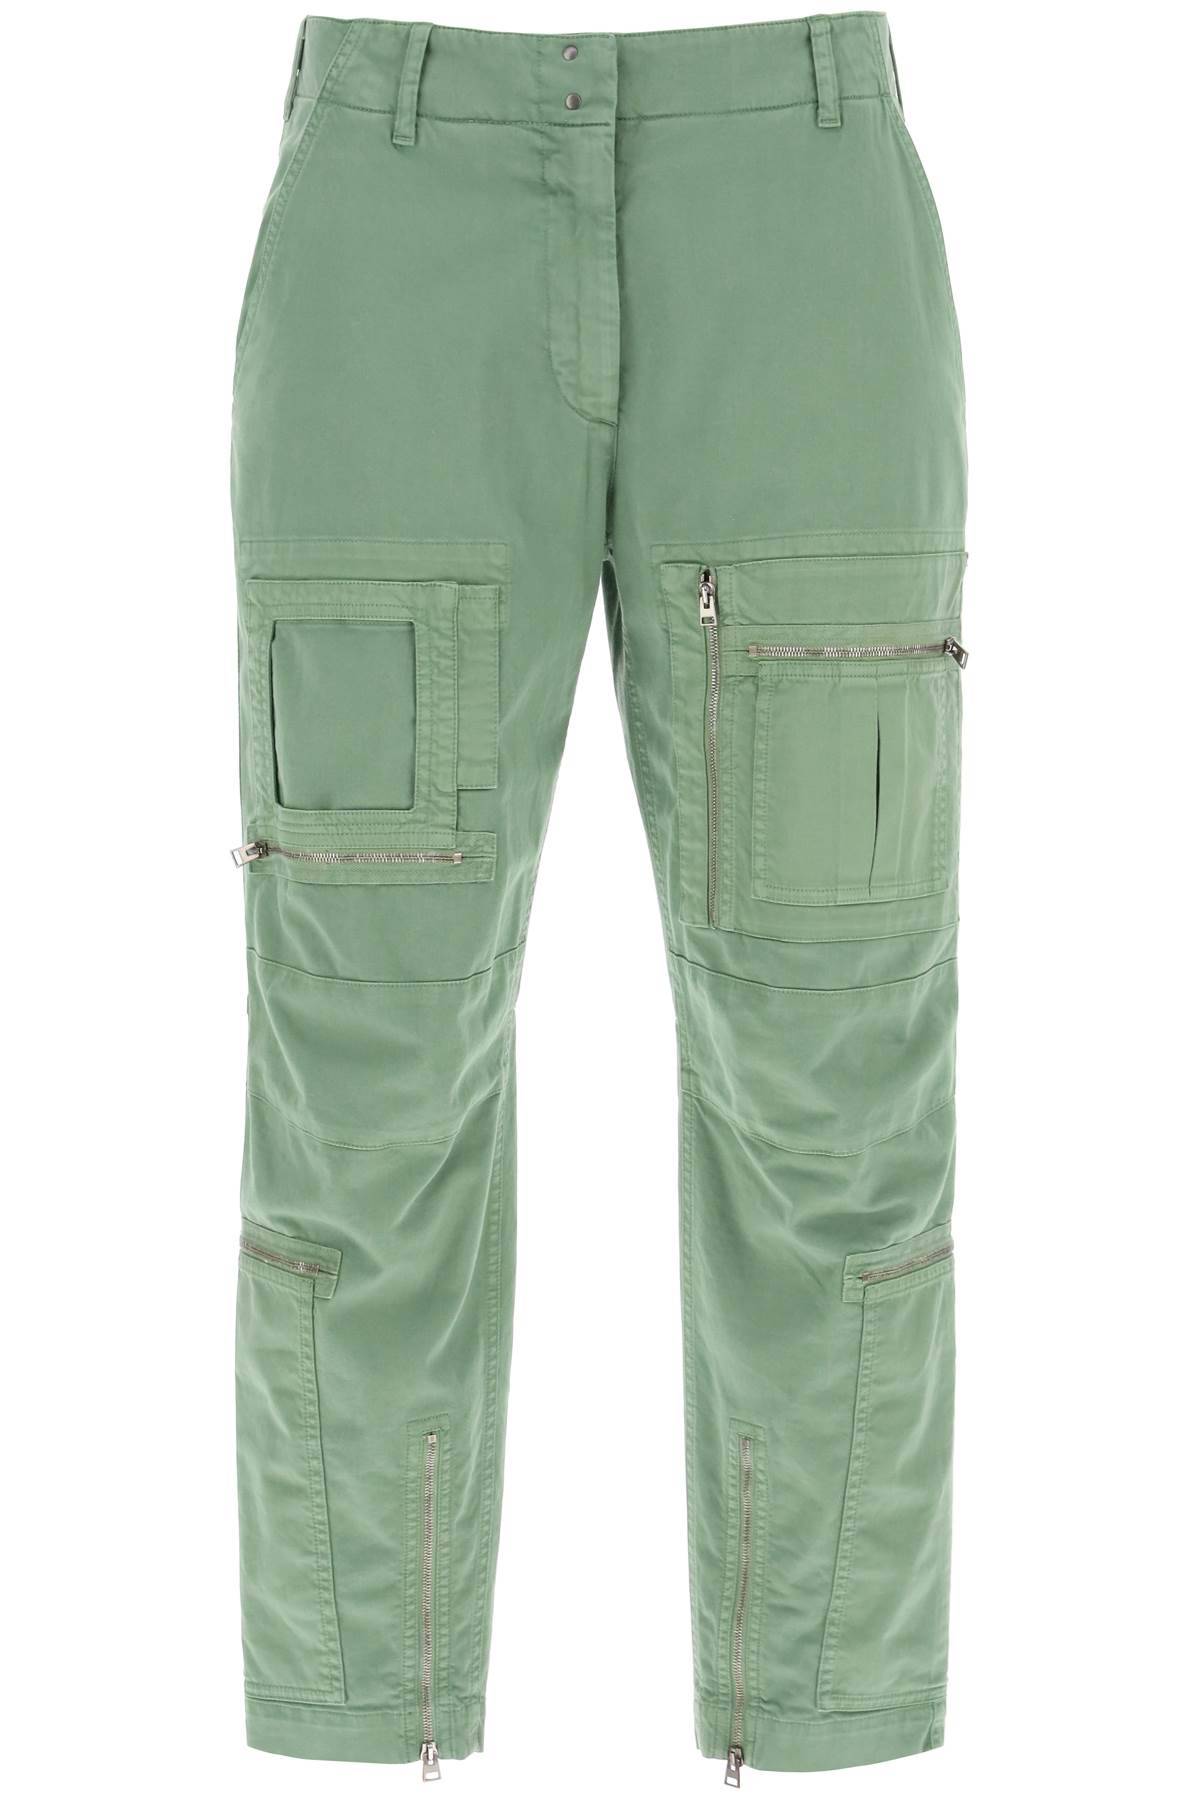 TOM FORD tapered cargo pants